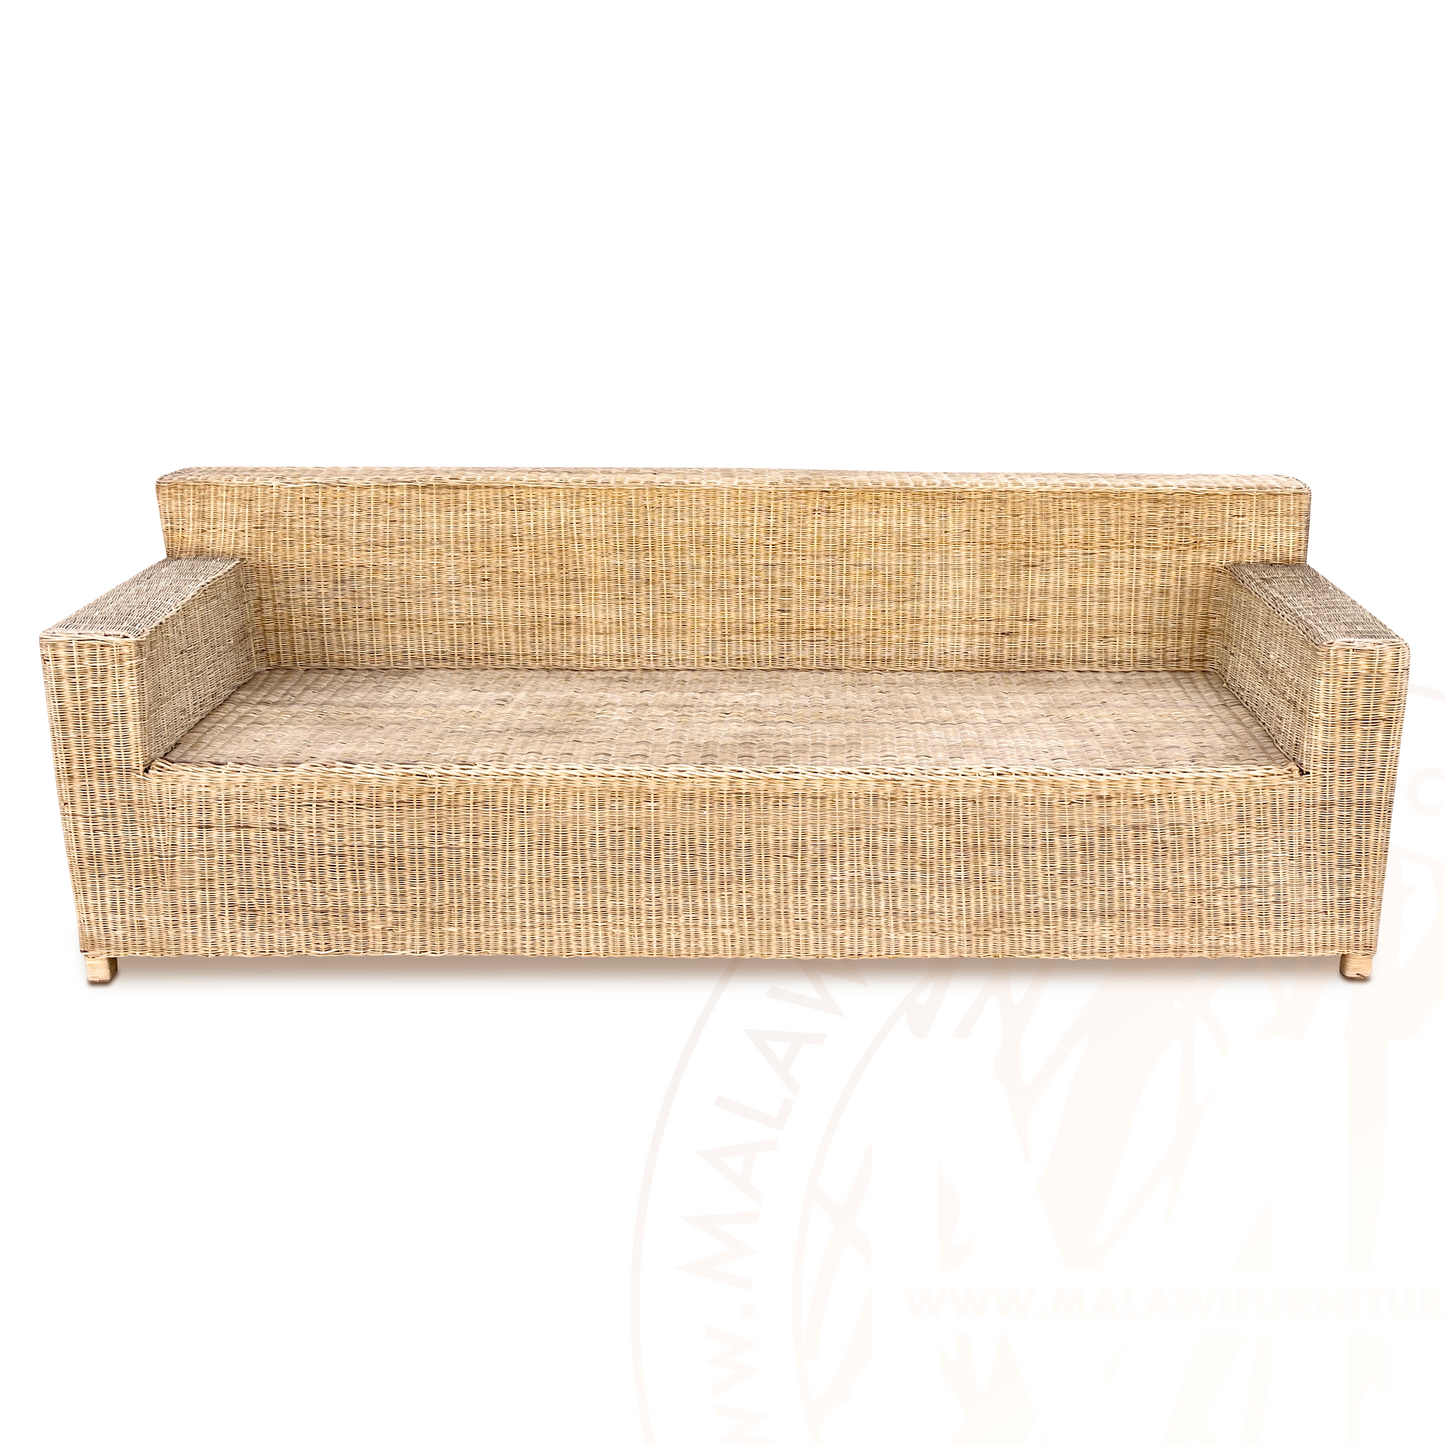 BOX Malawi Couch three Seater hand weaved woven rattan cane chair malawi with cushion